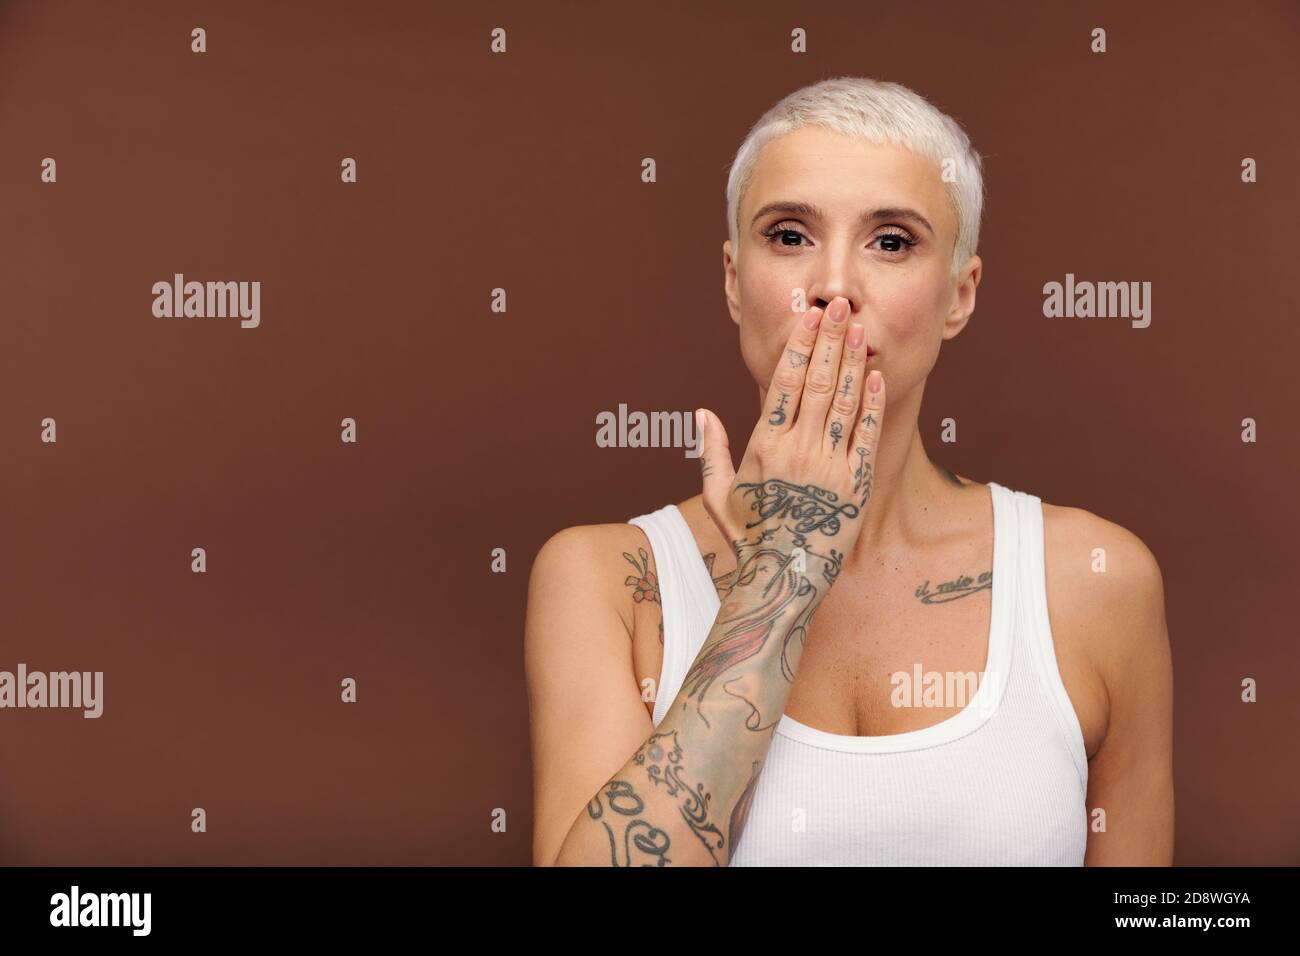 Manlike woman in white vest covering mouth by hand and showing arm with tattooes Stock Photo